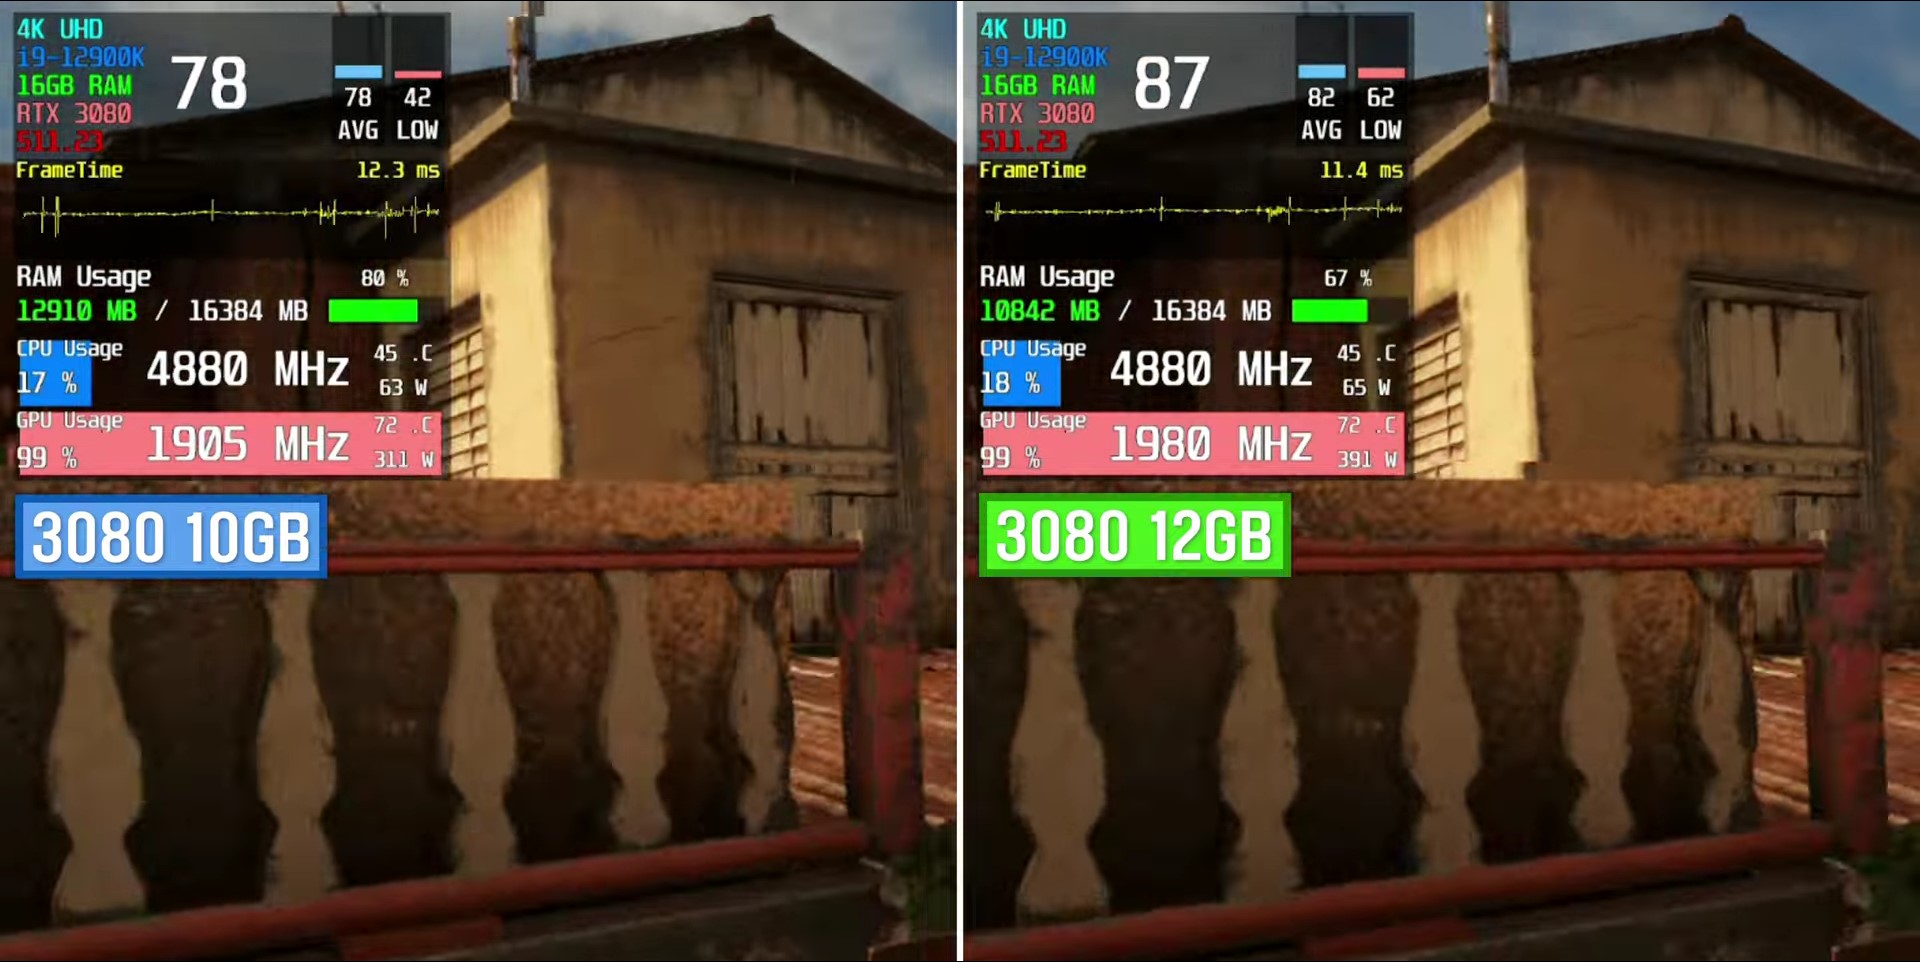 Benchmark Test of Ubisoft's Far Cry 6 on RTX 3080 10 GB and RTX 3080 12 GB at 4K